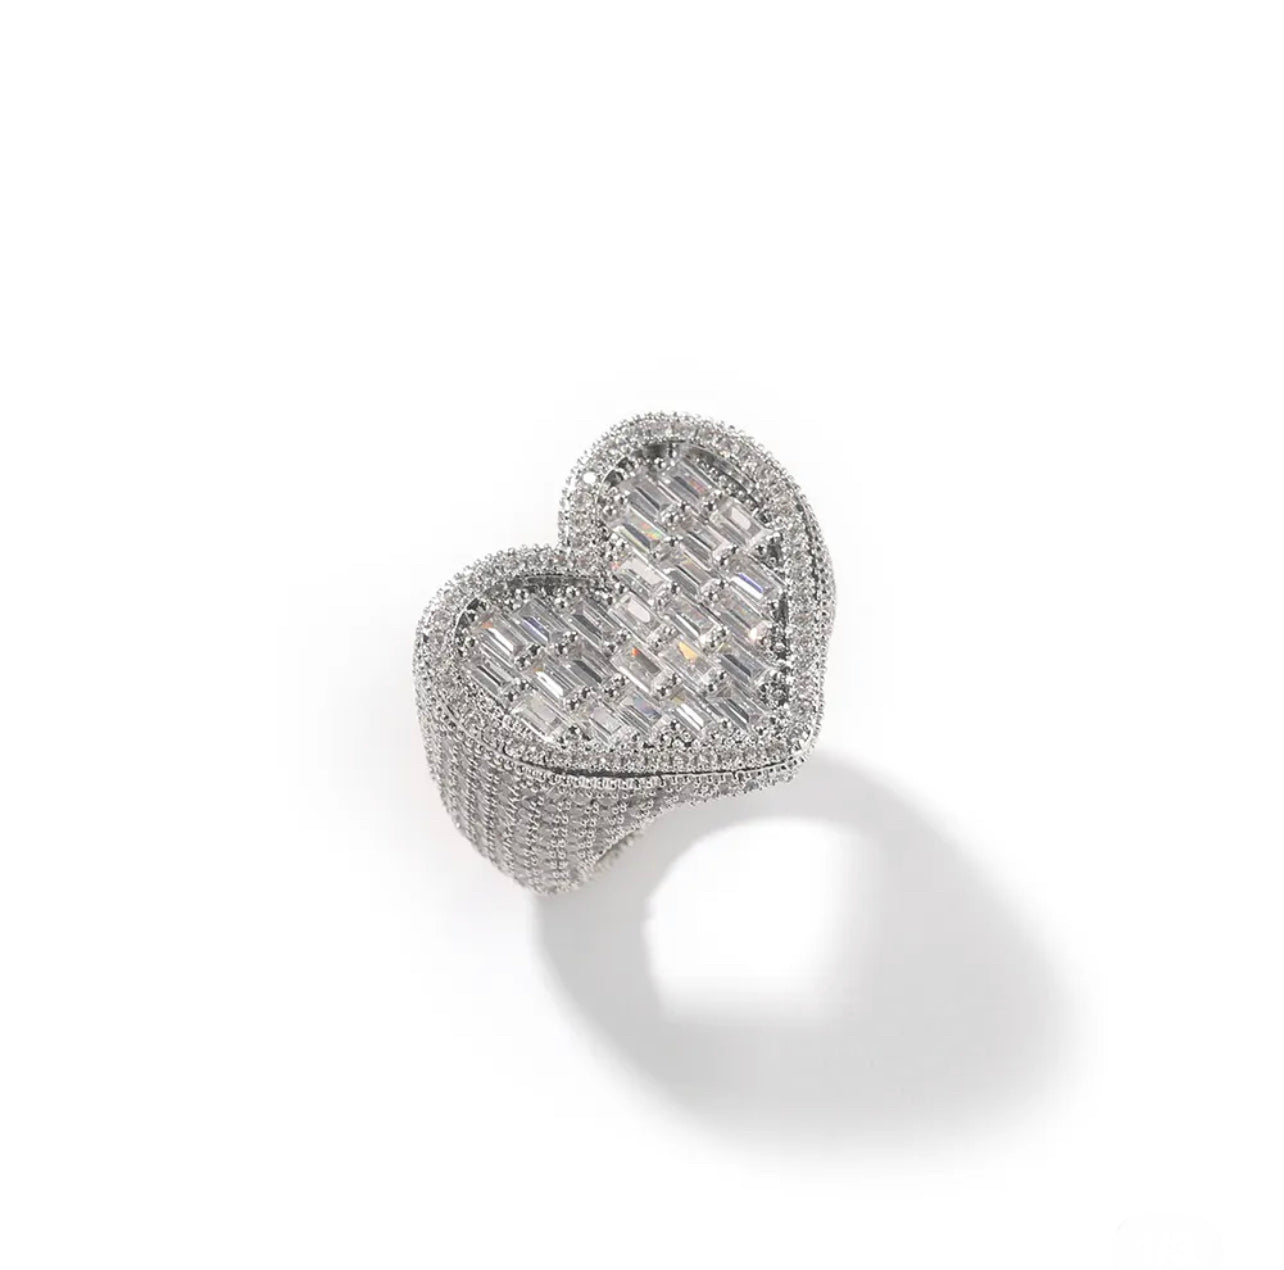 Crushed Heart Ring “Silver”